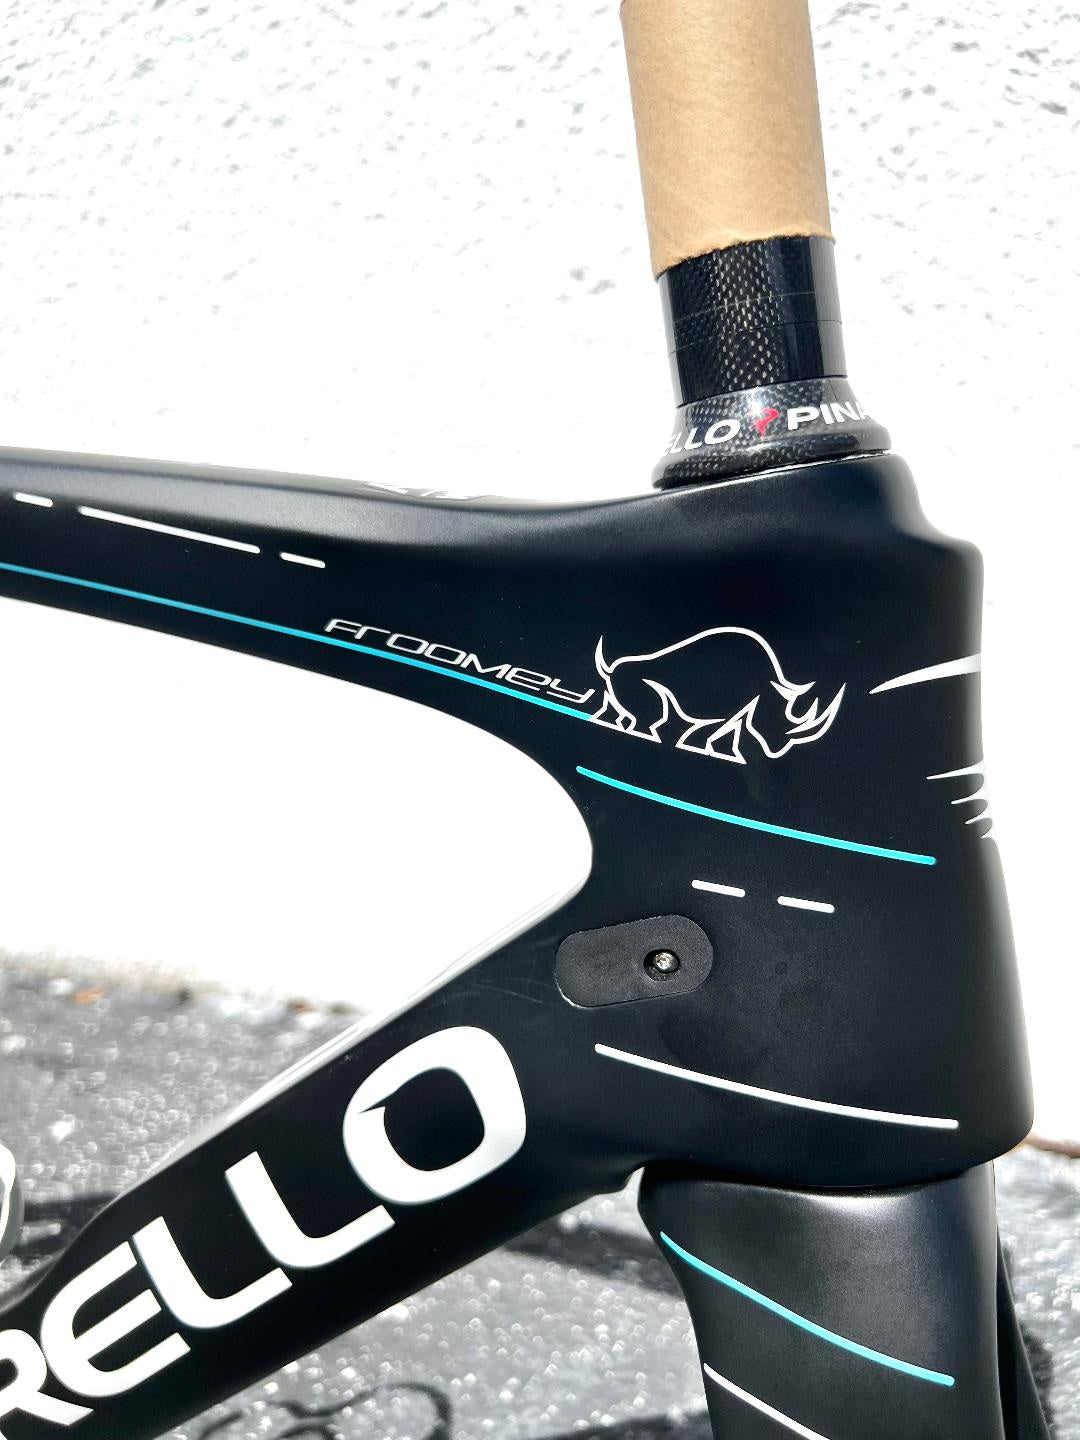 Pinarello Team Sky Dogma F10 Froomey Frameset - 53cm - Signed by Chris Froome